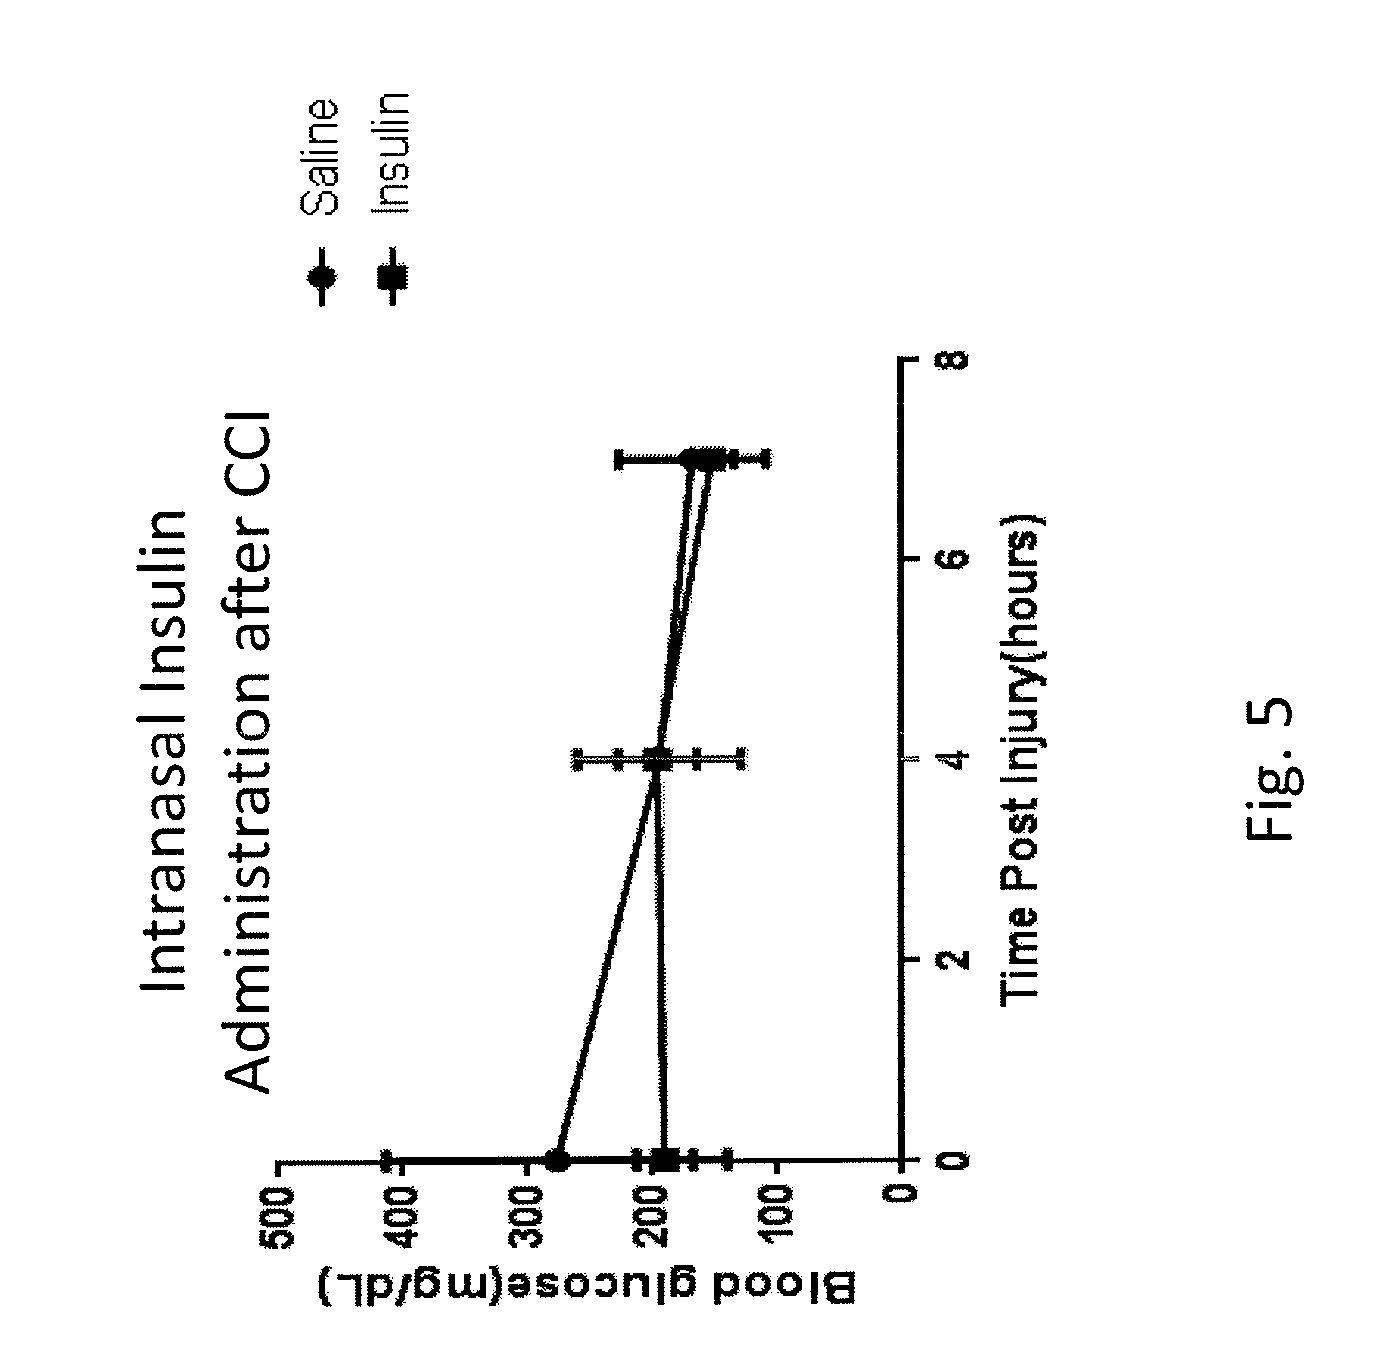 Methods for protecting and treating traumatic brain injury, concussion and brain inflammation with intranasal insulin